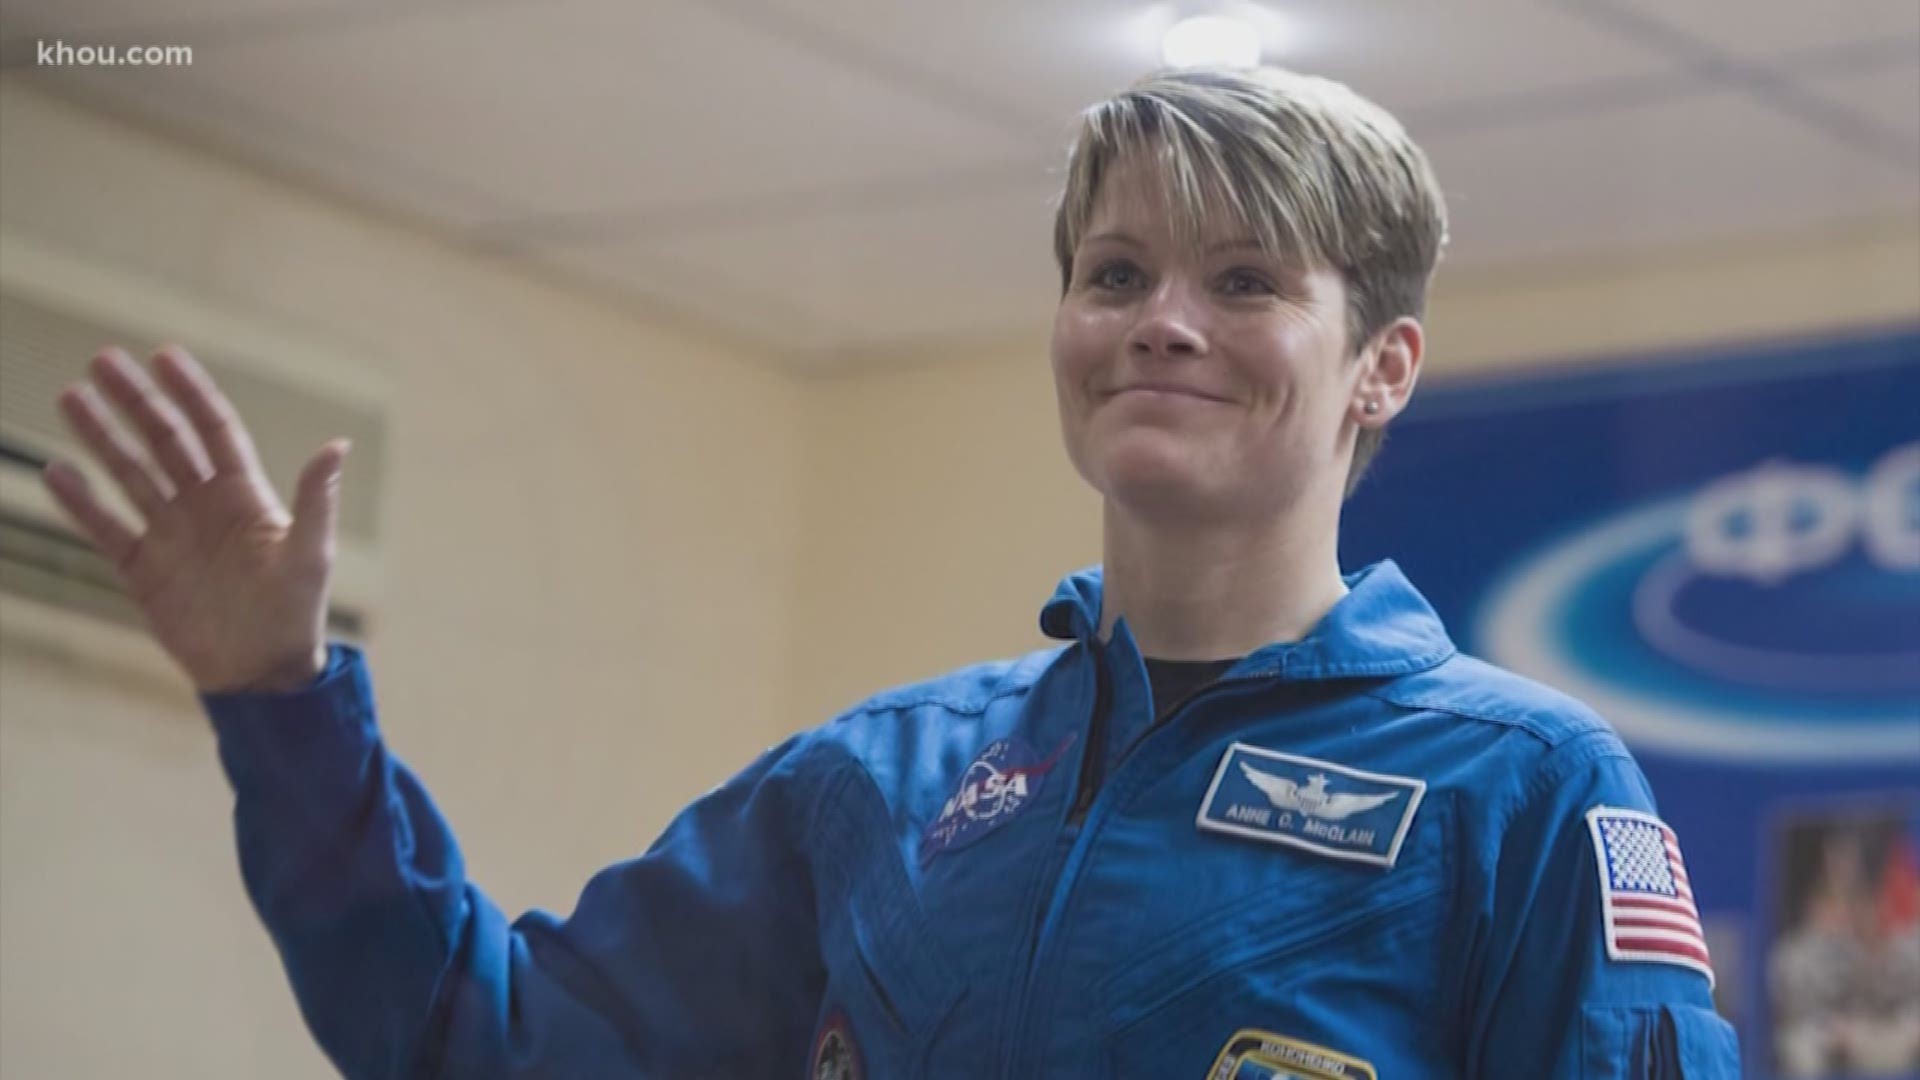 Astronaut Anne McClain accused of hacking into her wife's bank account while aboard the International Space Station. McClain and her wife were in the middle of a divorce at the time.